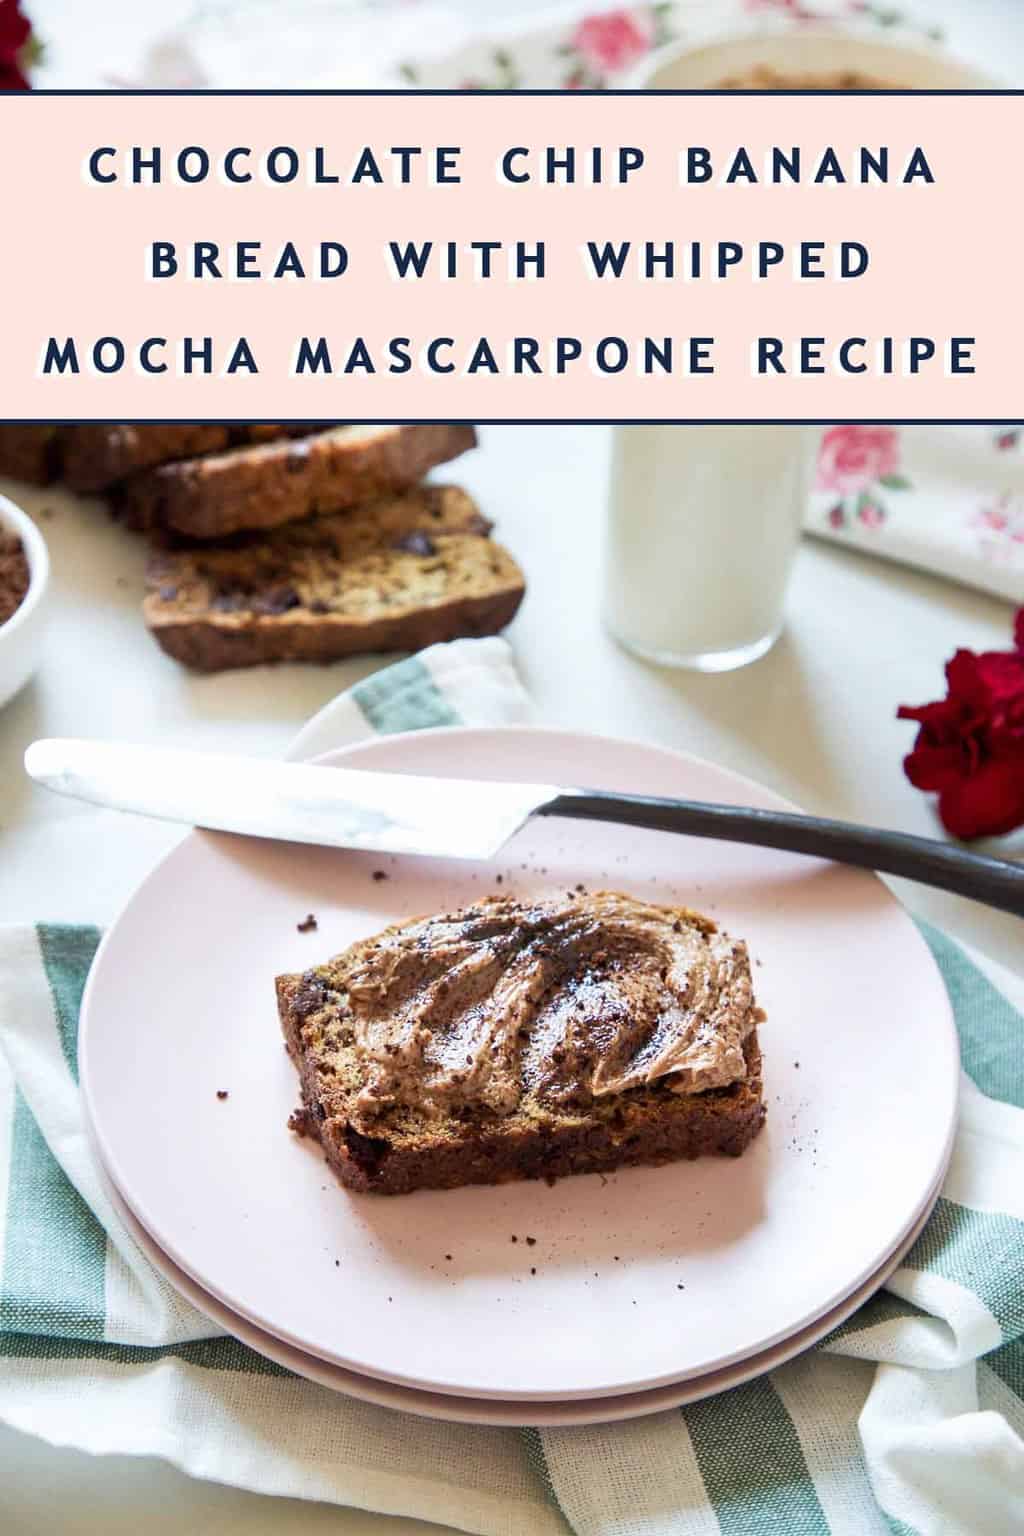 photo of the Chocolate Chip Banana Bread With Whipped Mocha Mascarpone Topping by top Houston lifestyle blogger Ashley Rose of Sugar & Cloth